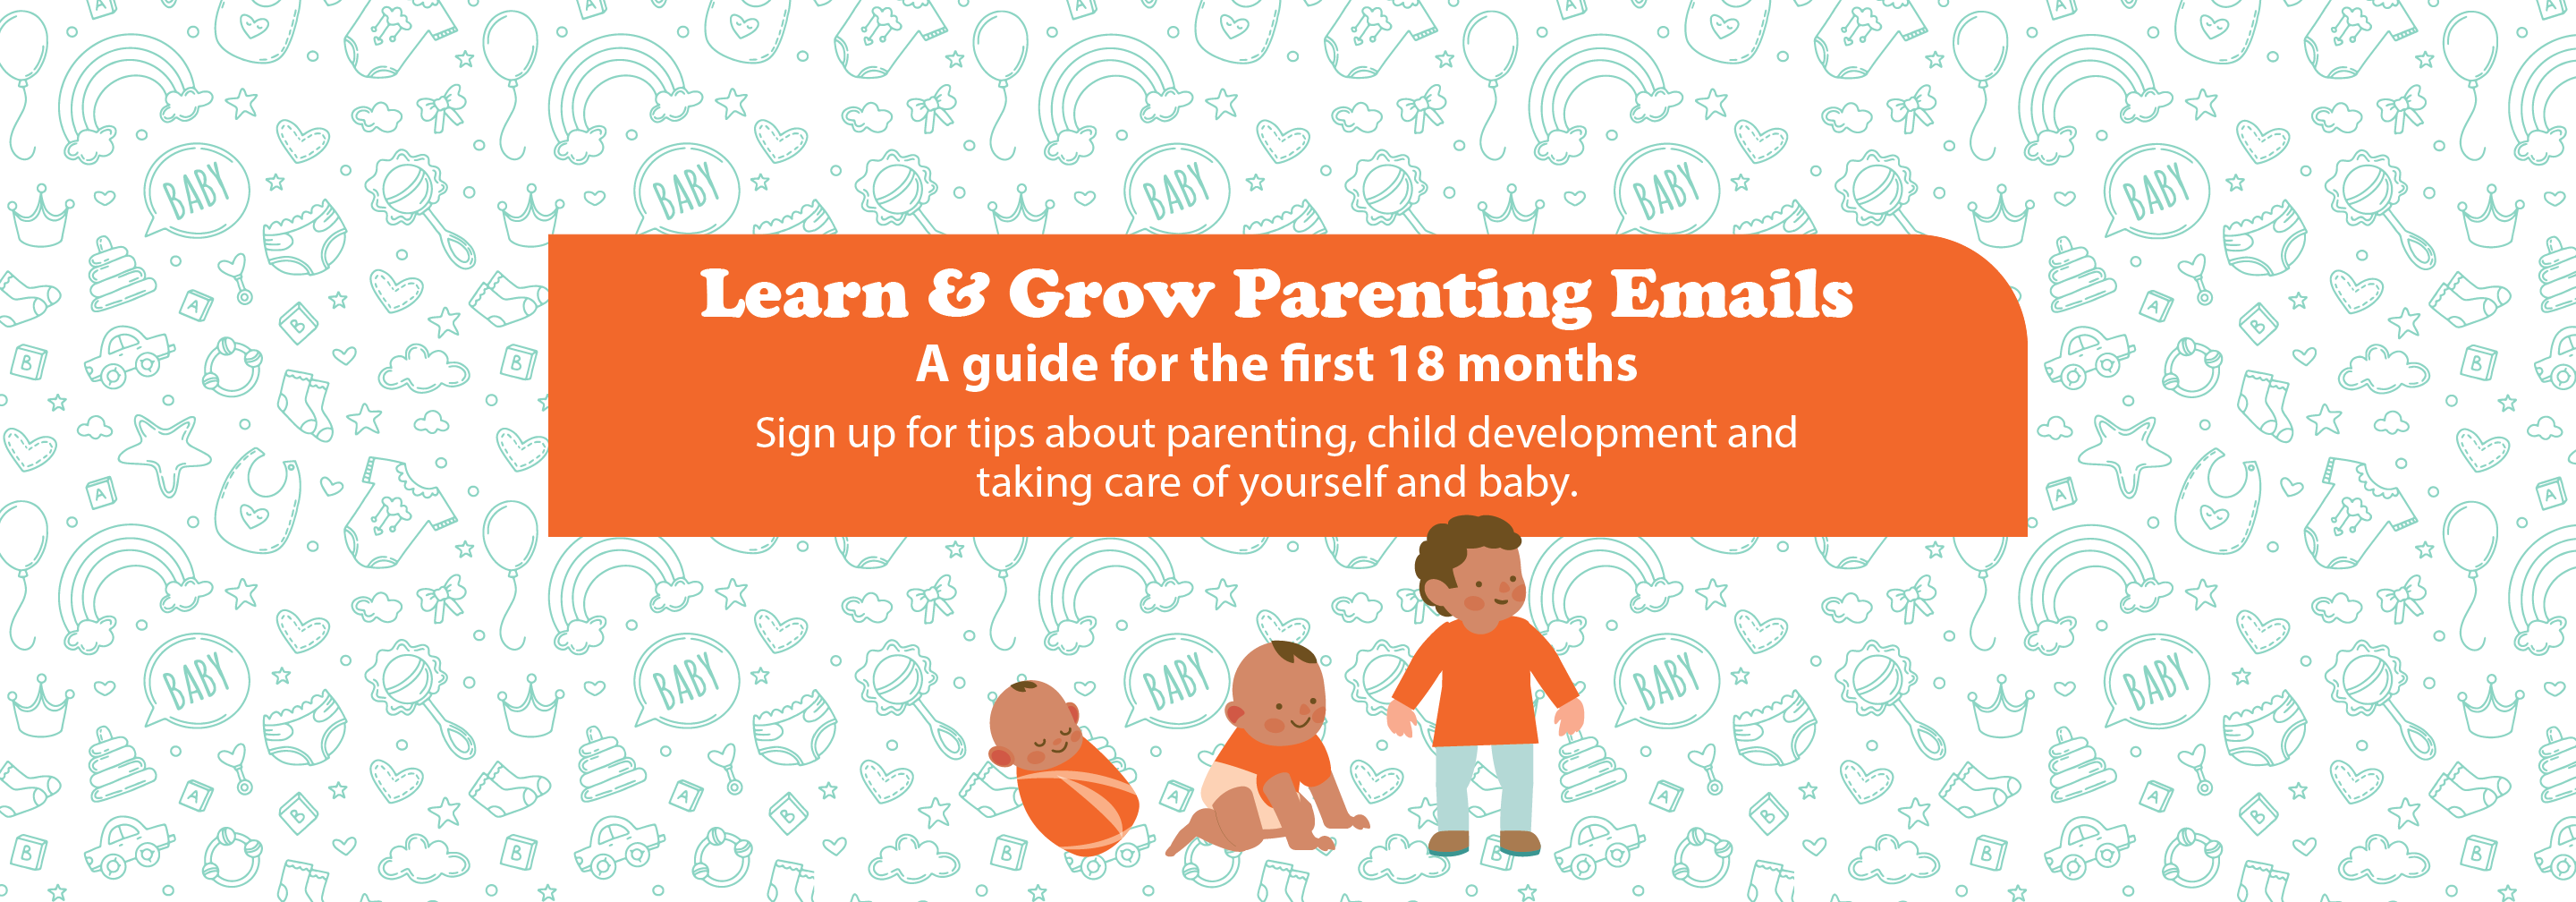 Learn and Grow Parenting Emails